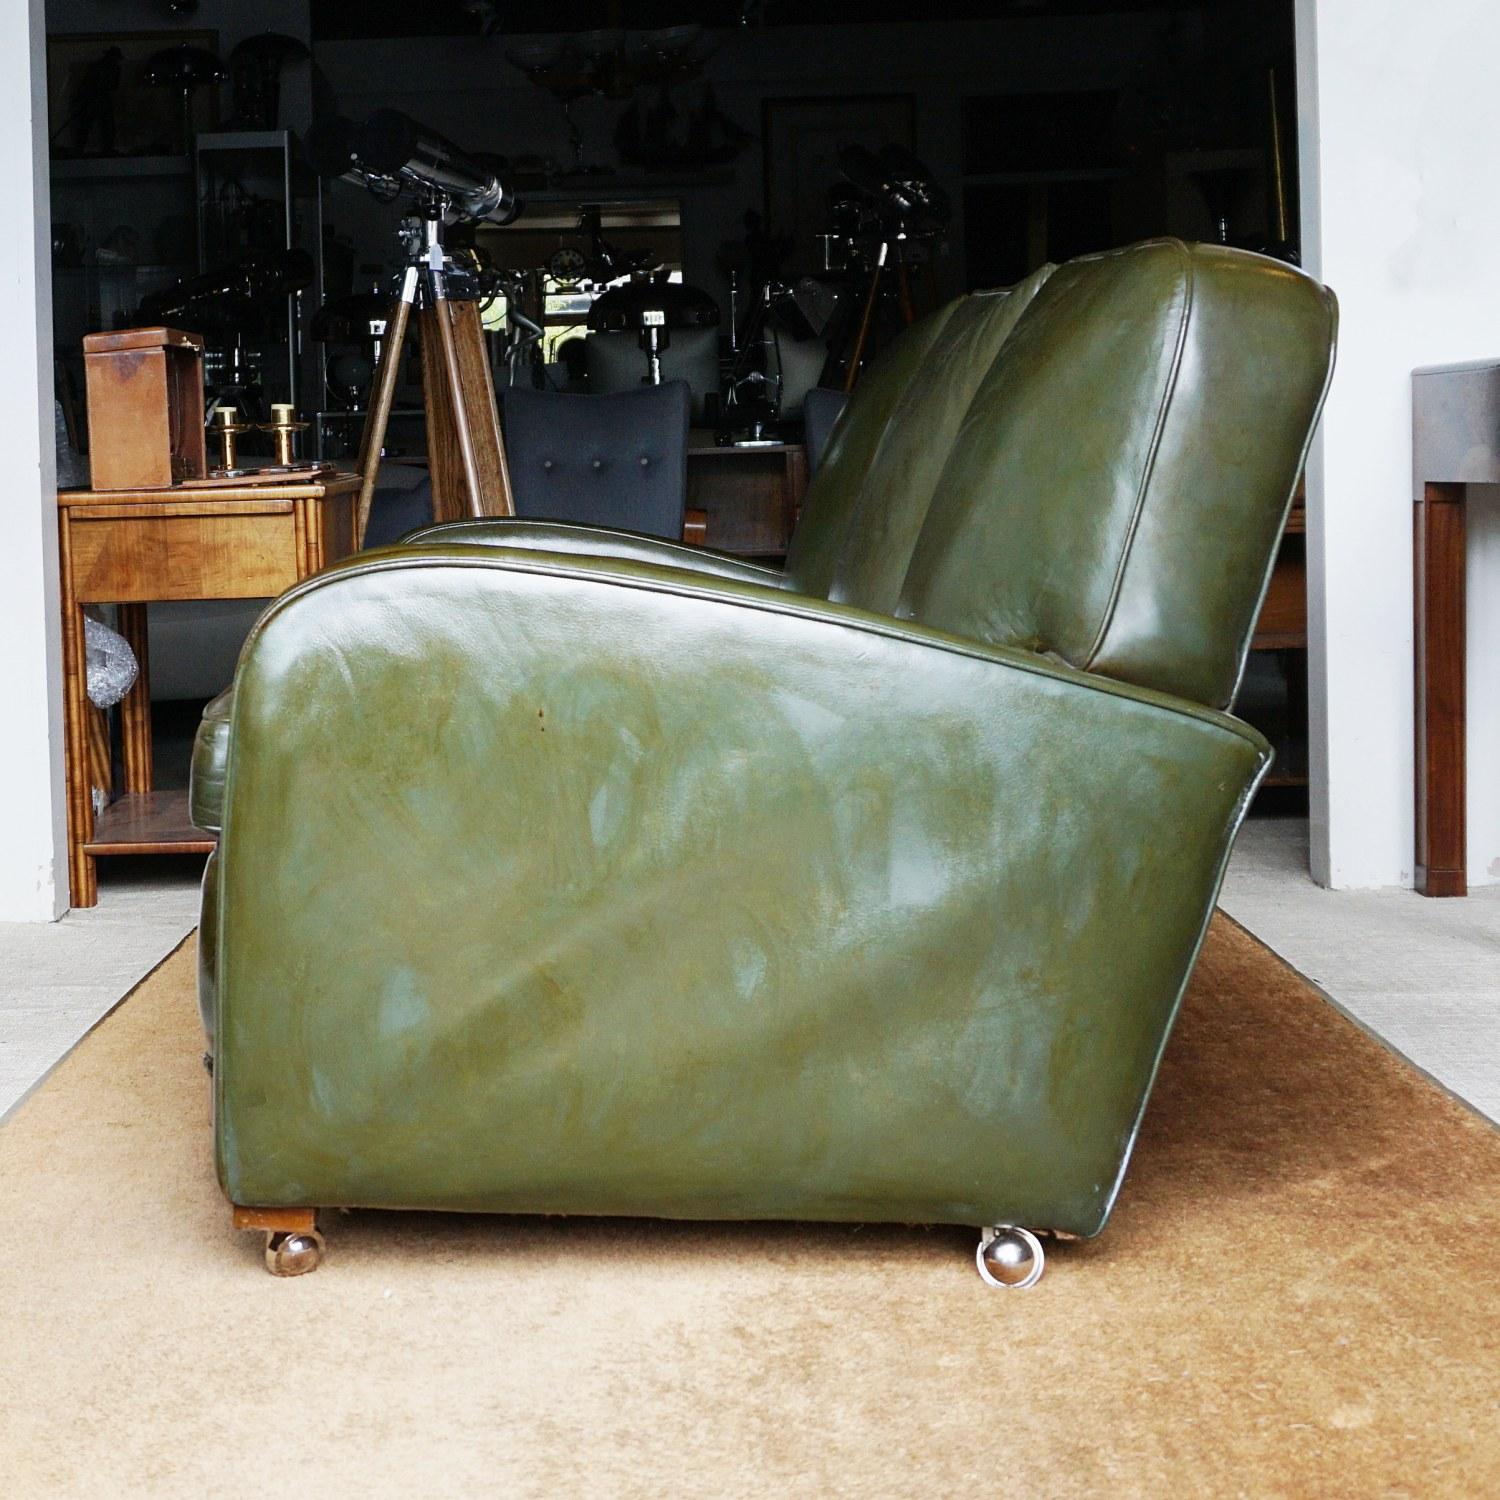 Leather Art Deco Tank Sofa Attributed to Heal's of London